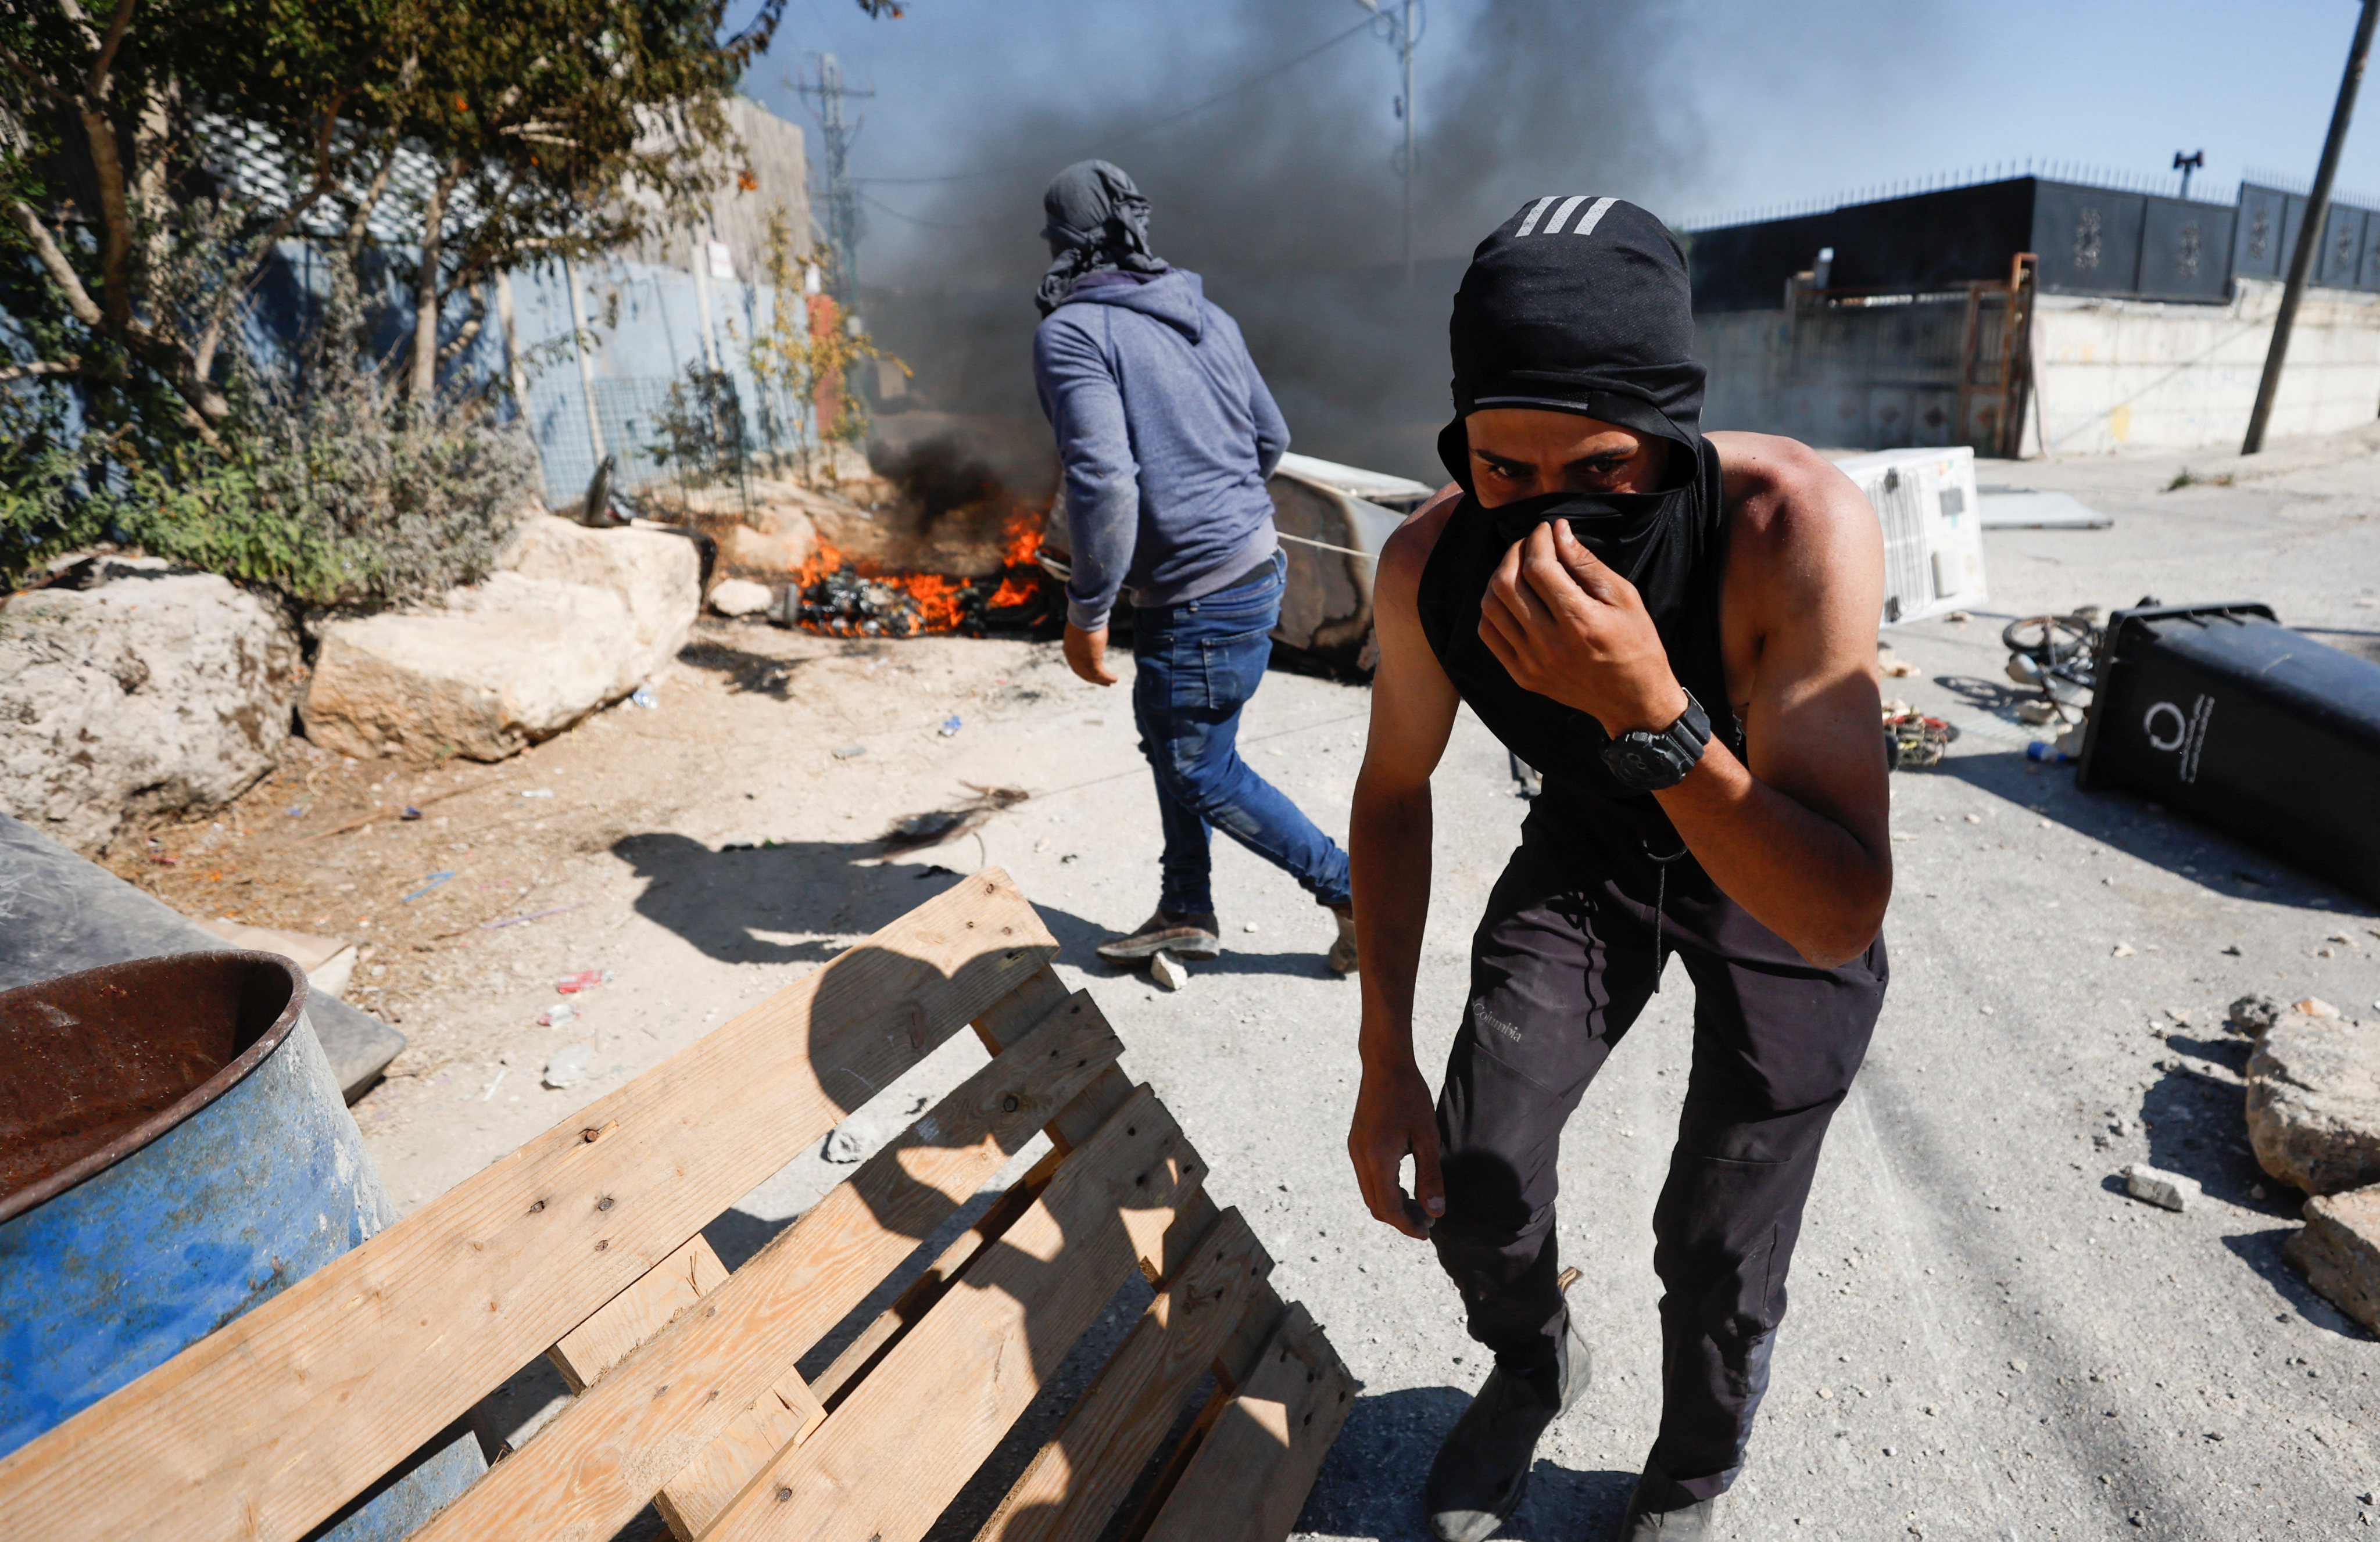 A Palestinian covers his face during clashes with Israeli troops after Israeli settlers attack Umm Safa village near Ramallah, in the Israeli-occupied West Bank, on Saturday. Photo: Reuters